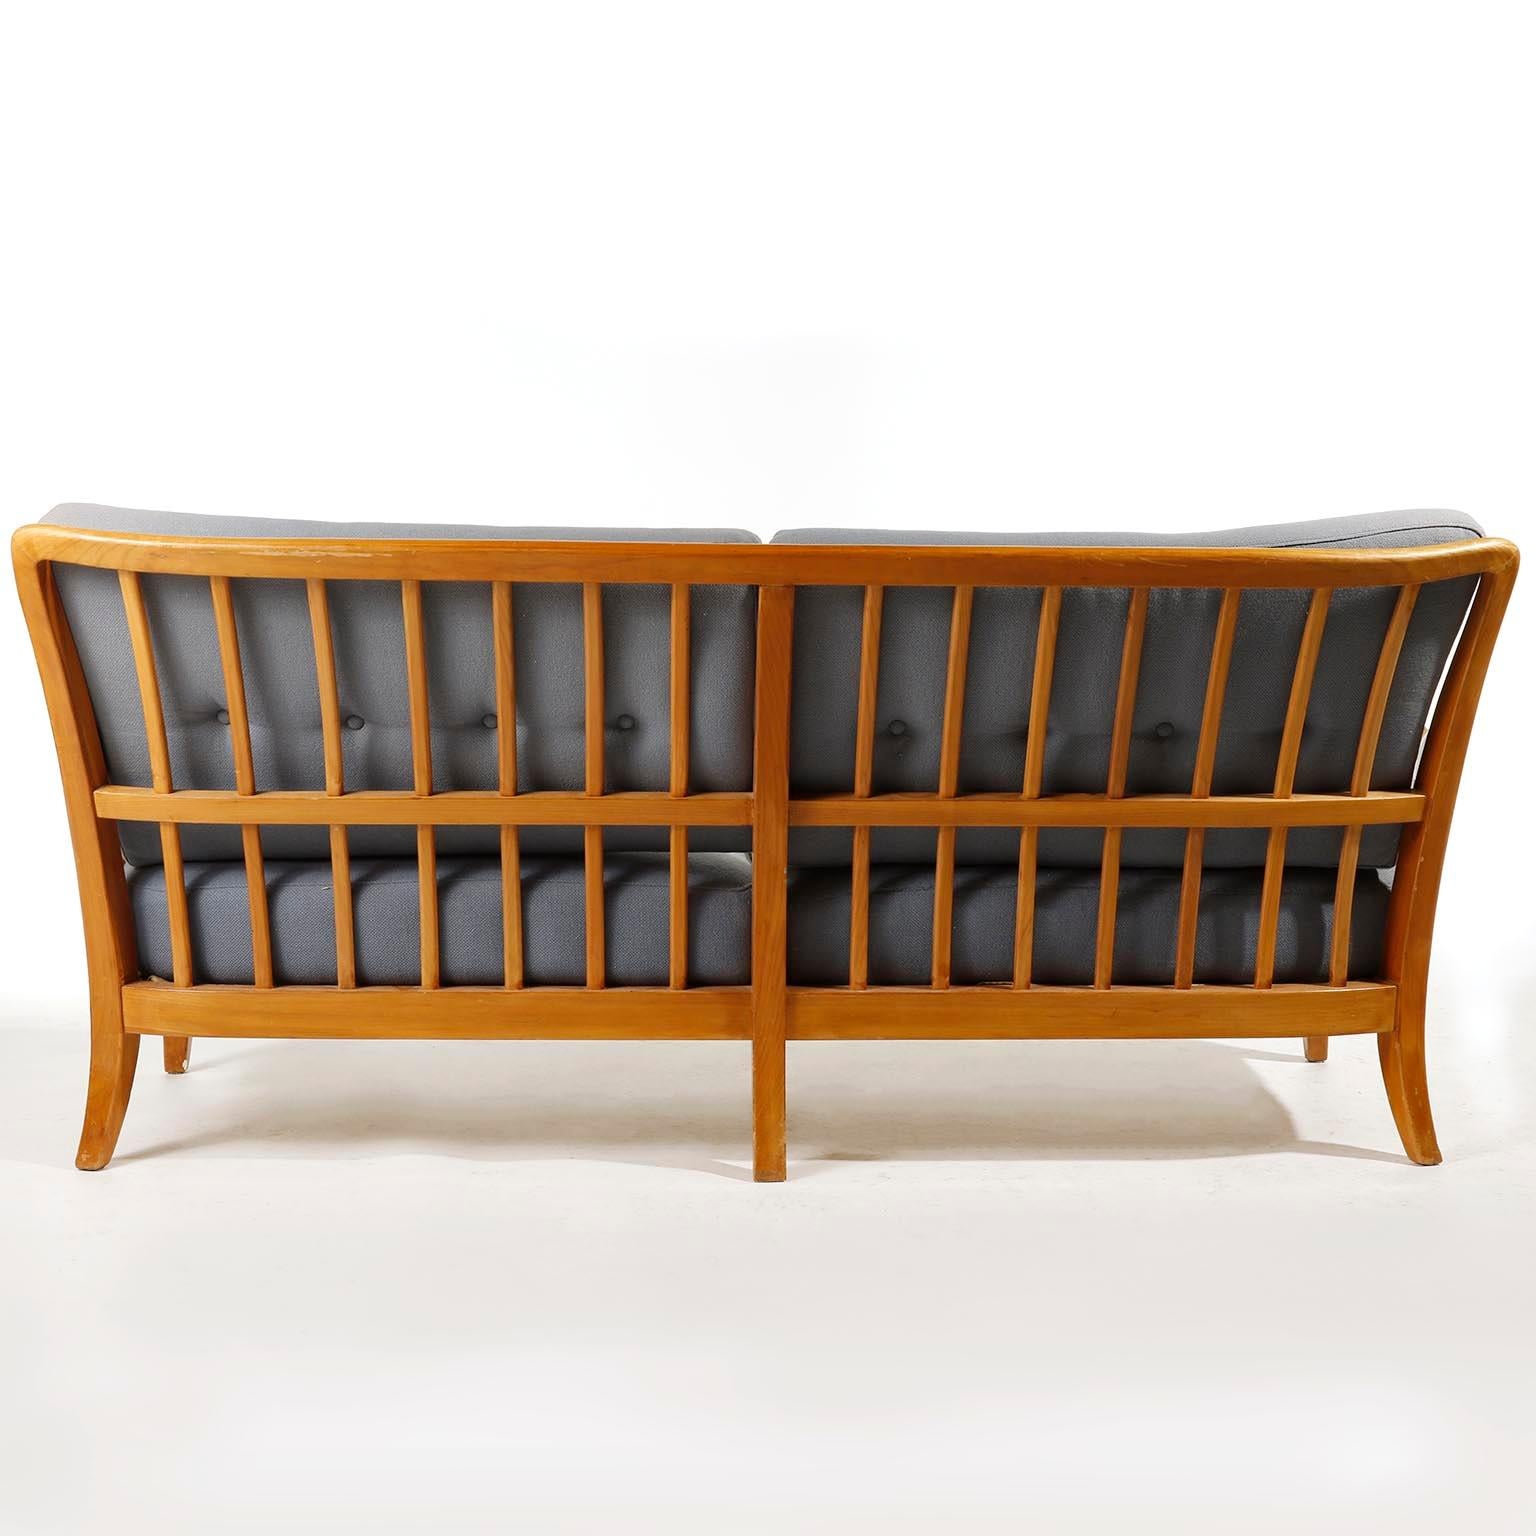 Bench Seette Seat by Thonet, Attributed to Josef Frank, Wood, 1940 For Sale 1